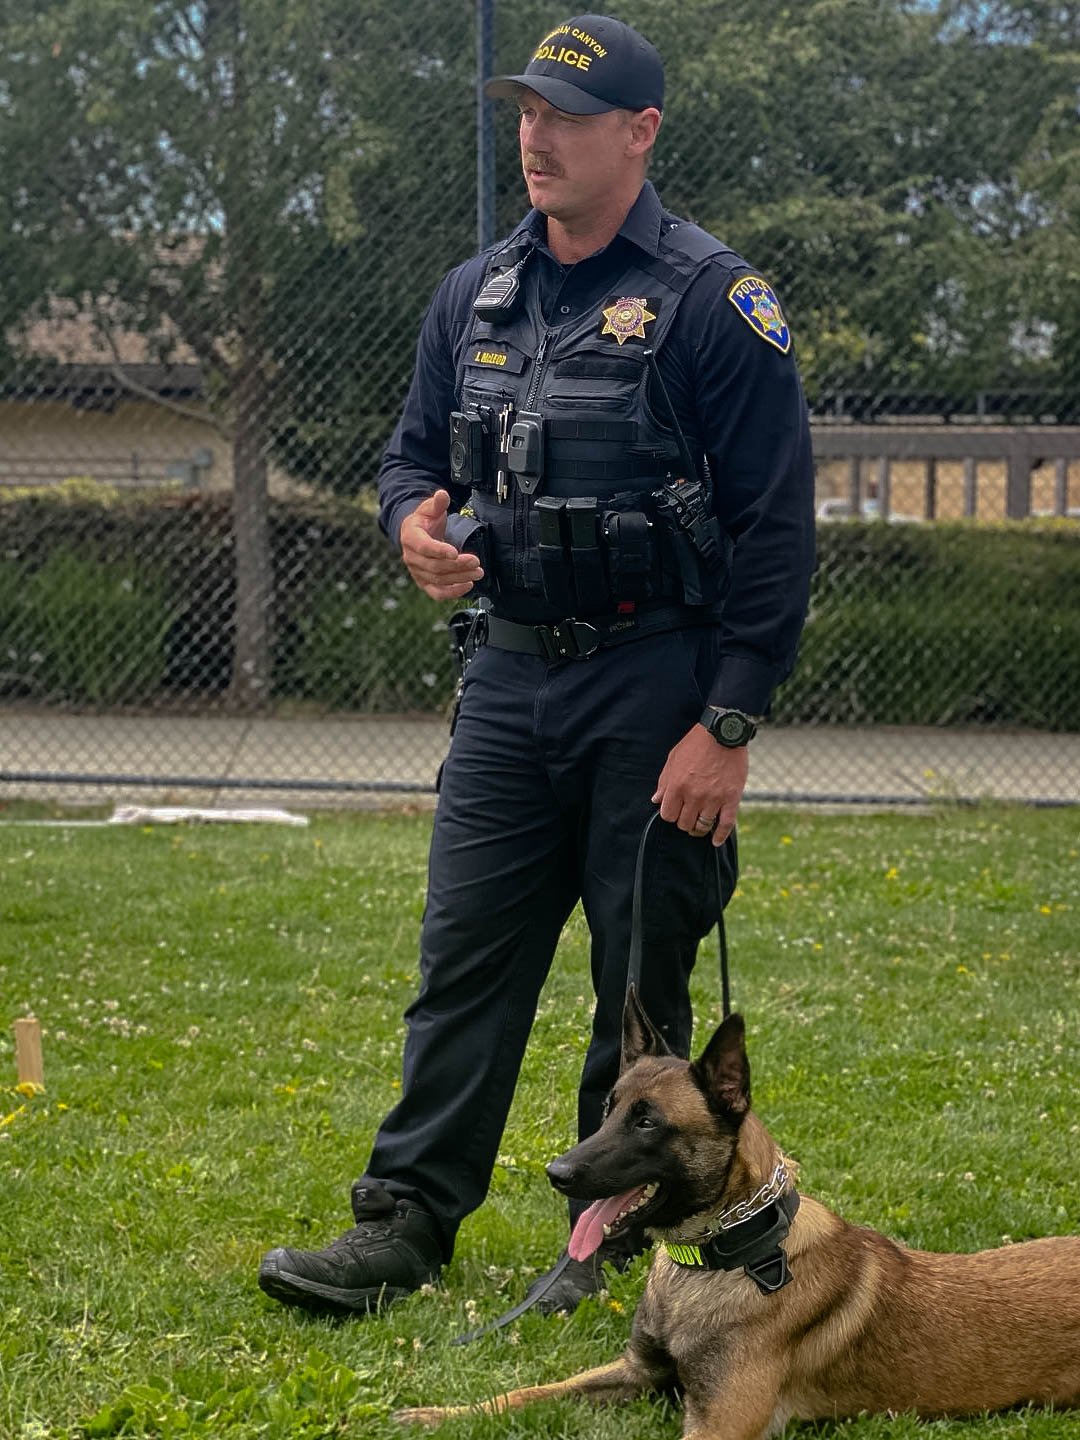 A police officer in a dark blue uniform and tactical gear stands in a grassy area beside a Belgian Malinois police dog, which is sitting and panting. The officer, with a serious expression, gestures with his hands as if explaining or instructing, while wearing a badge and cap marked "POLICE."